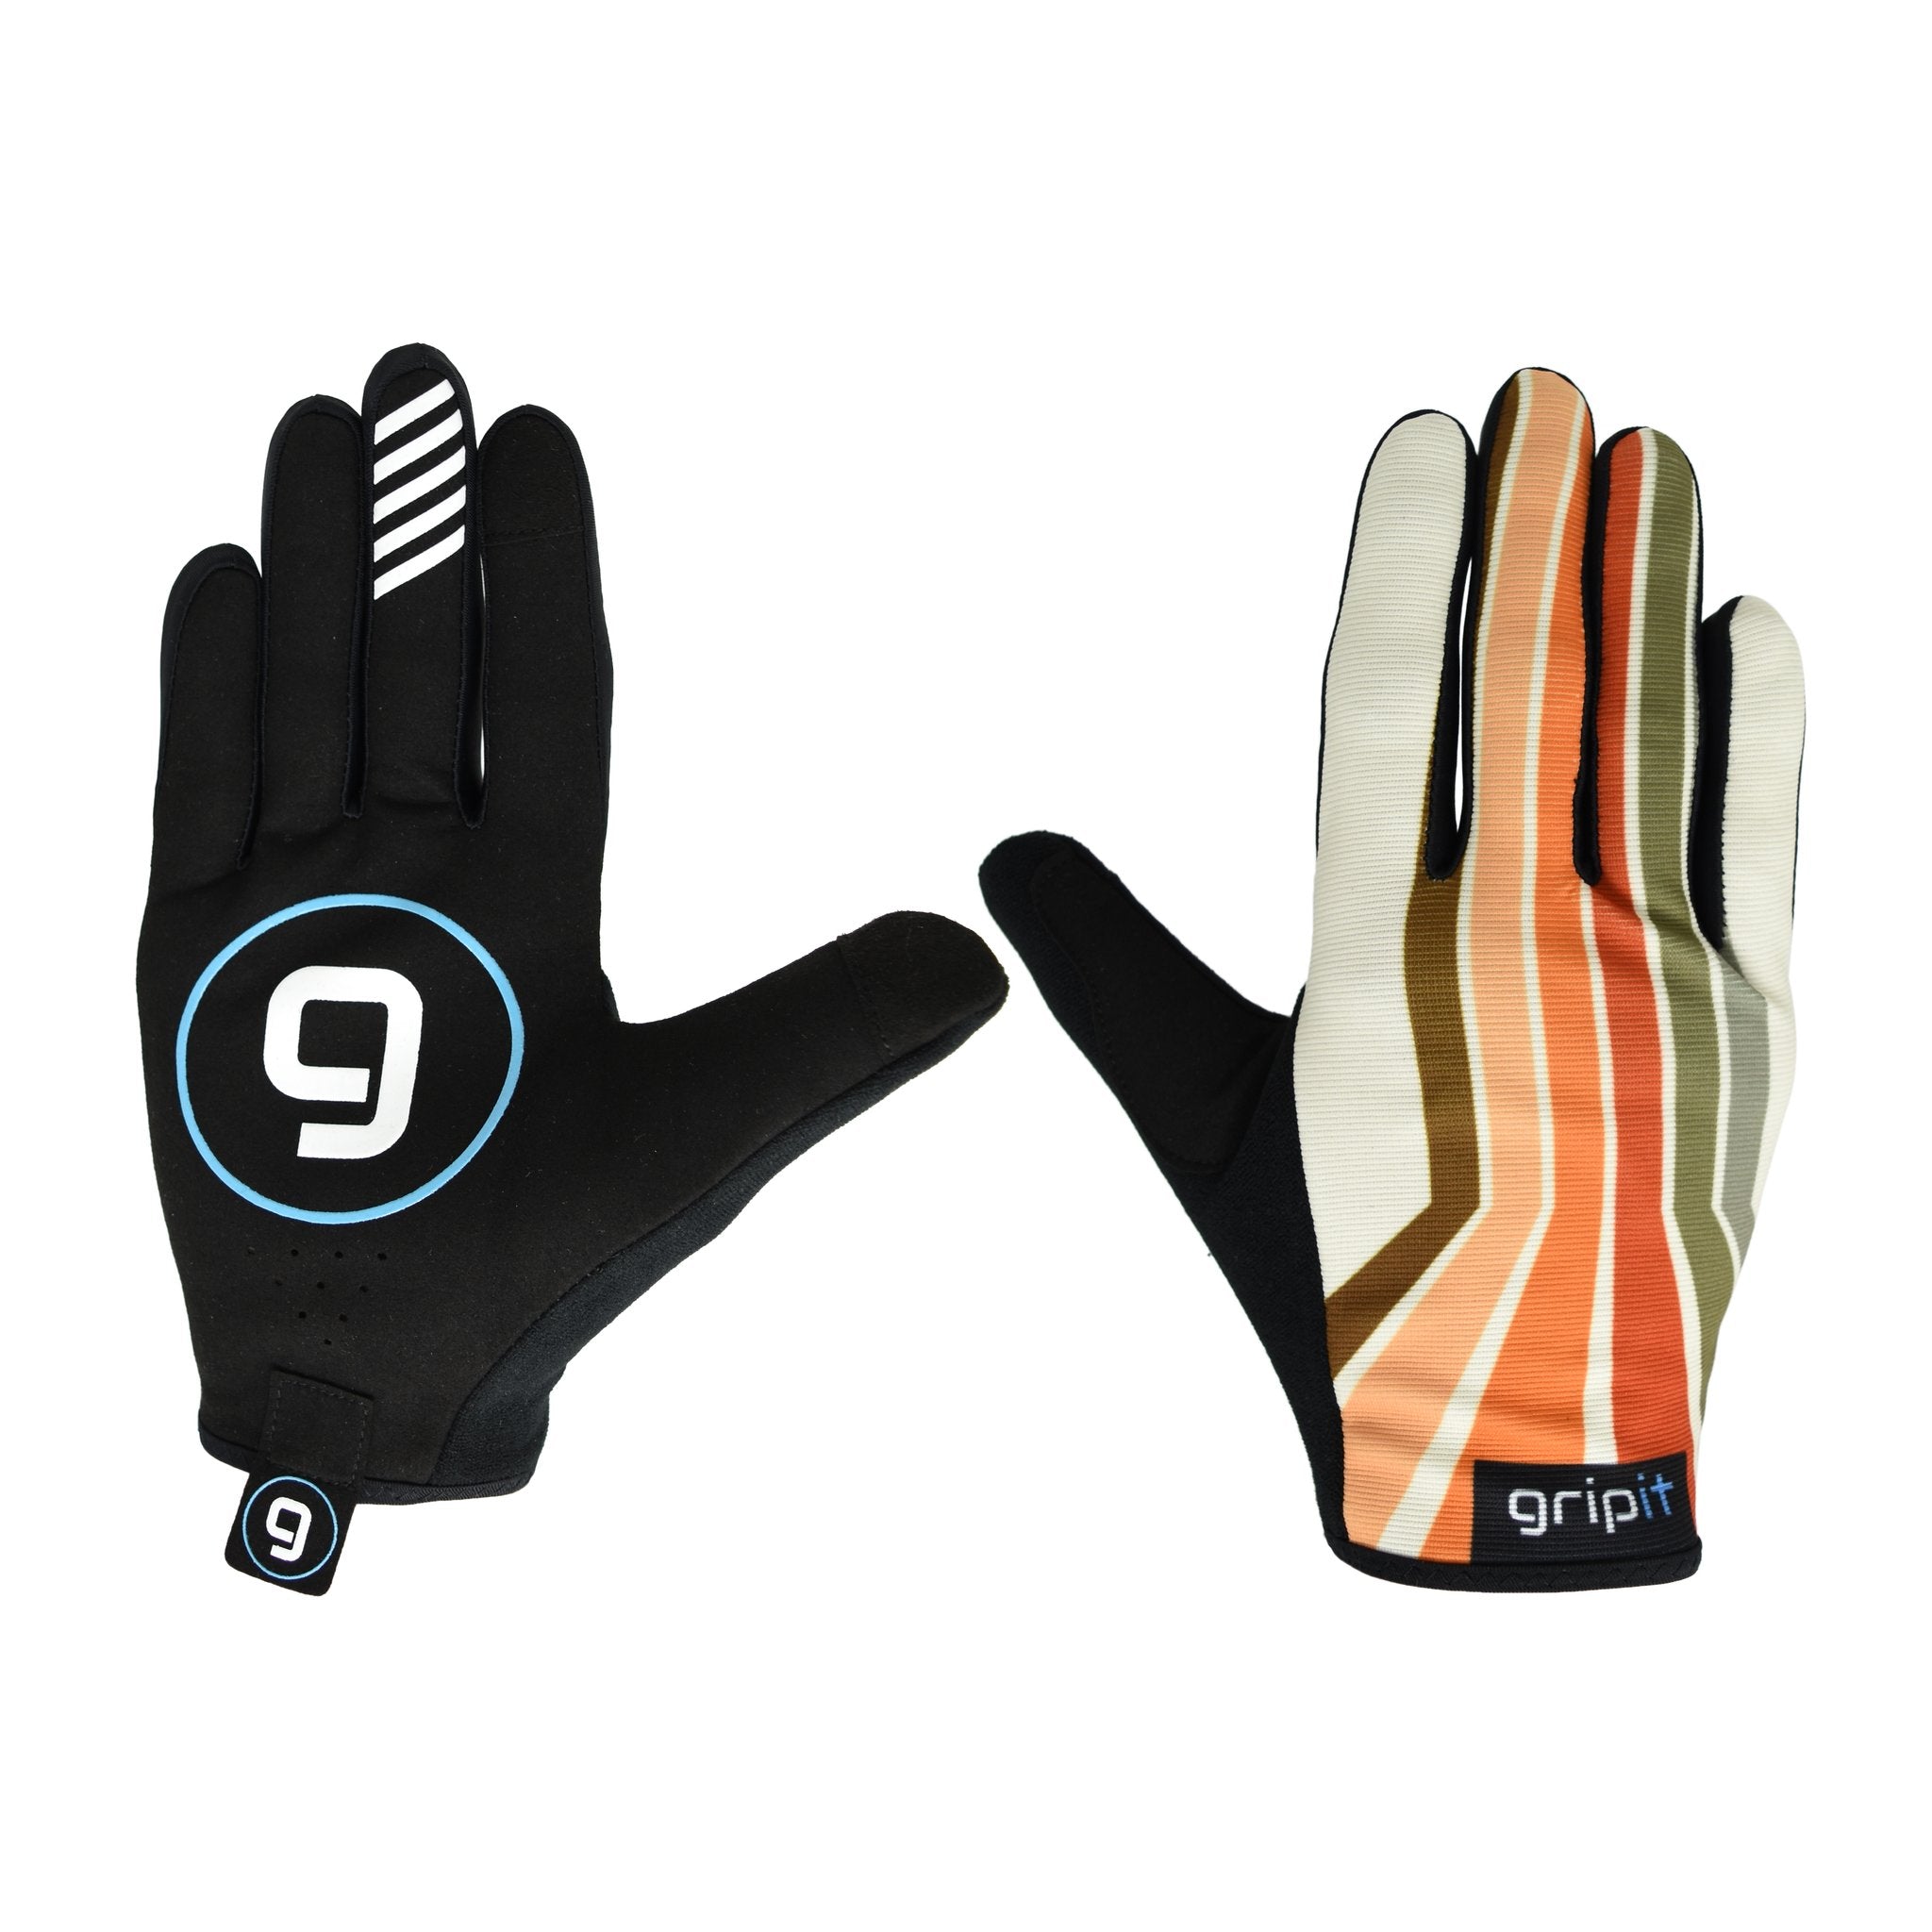 GRIPIT Gloves Tech Collection